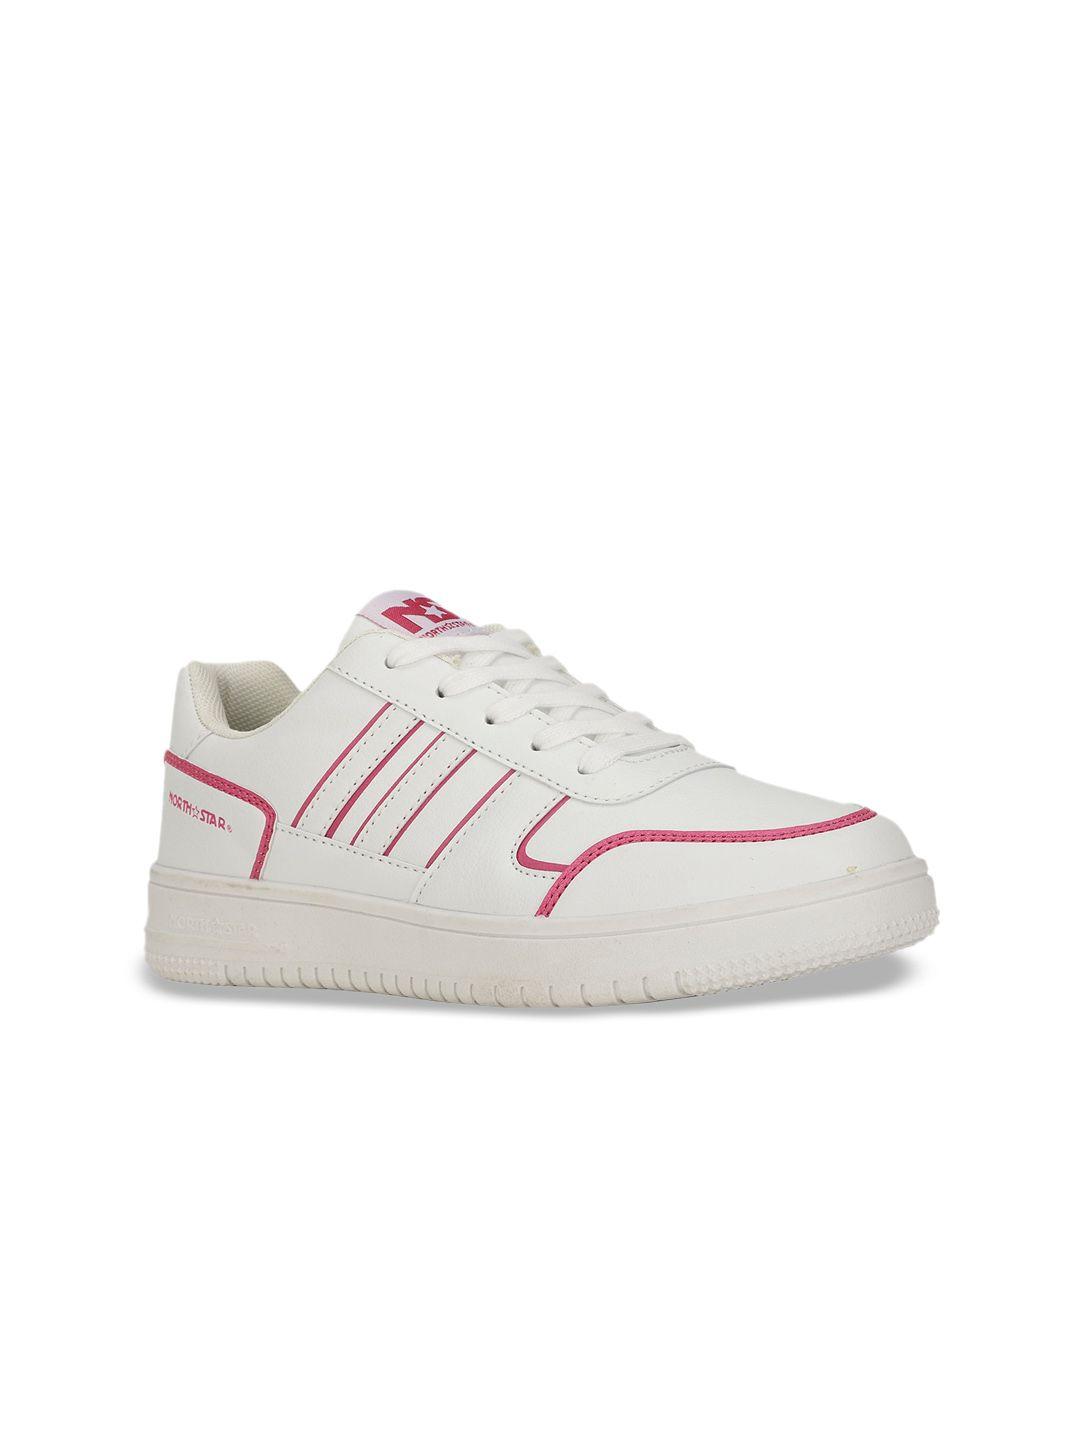 north star women textured pu sneakers